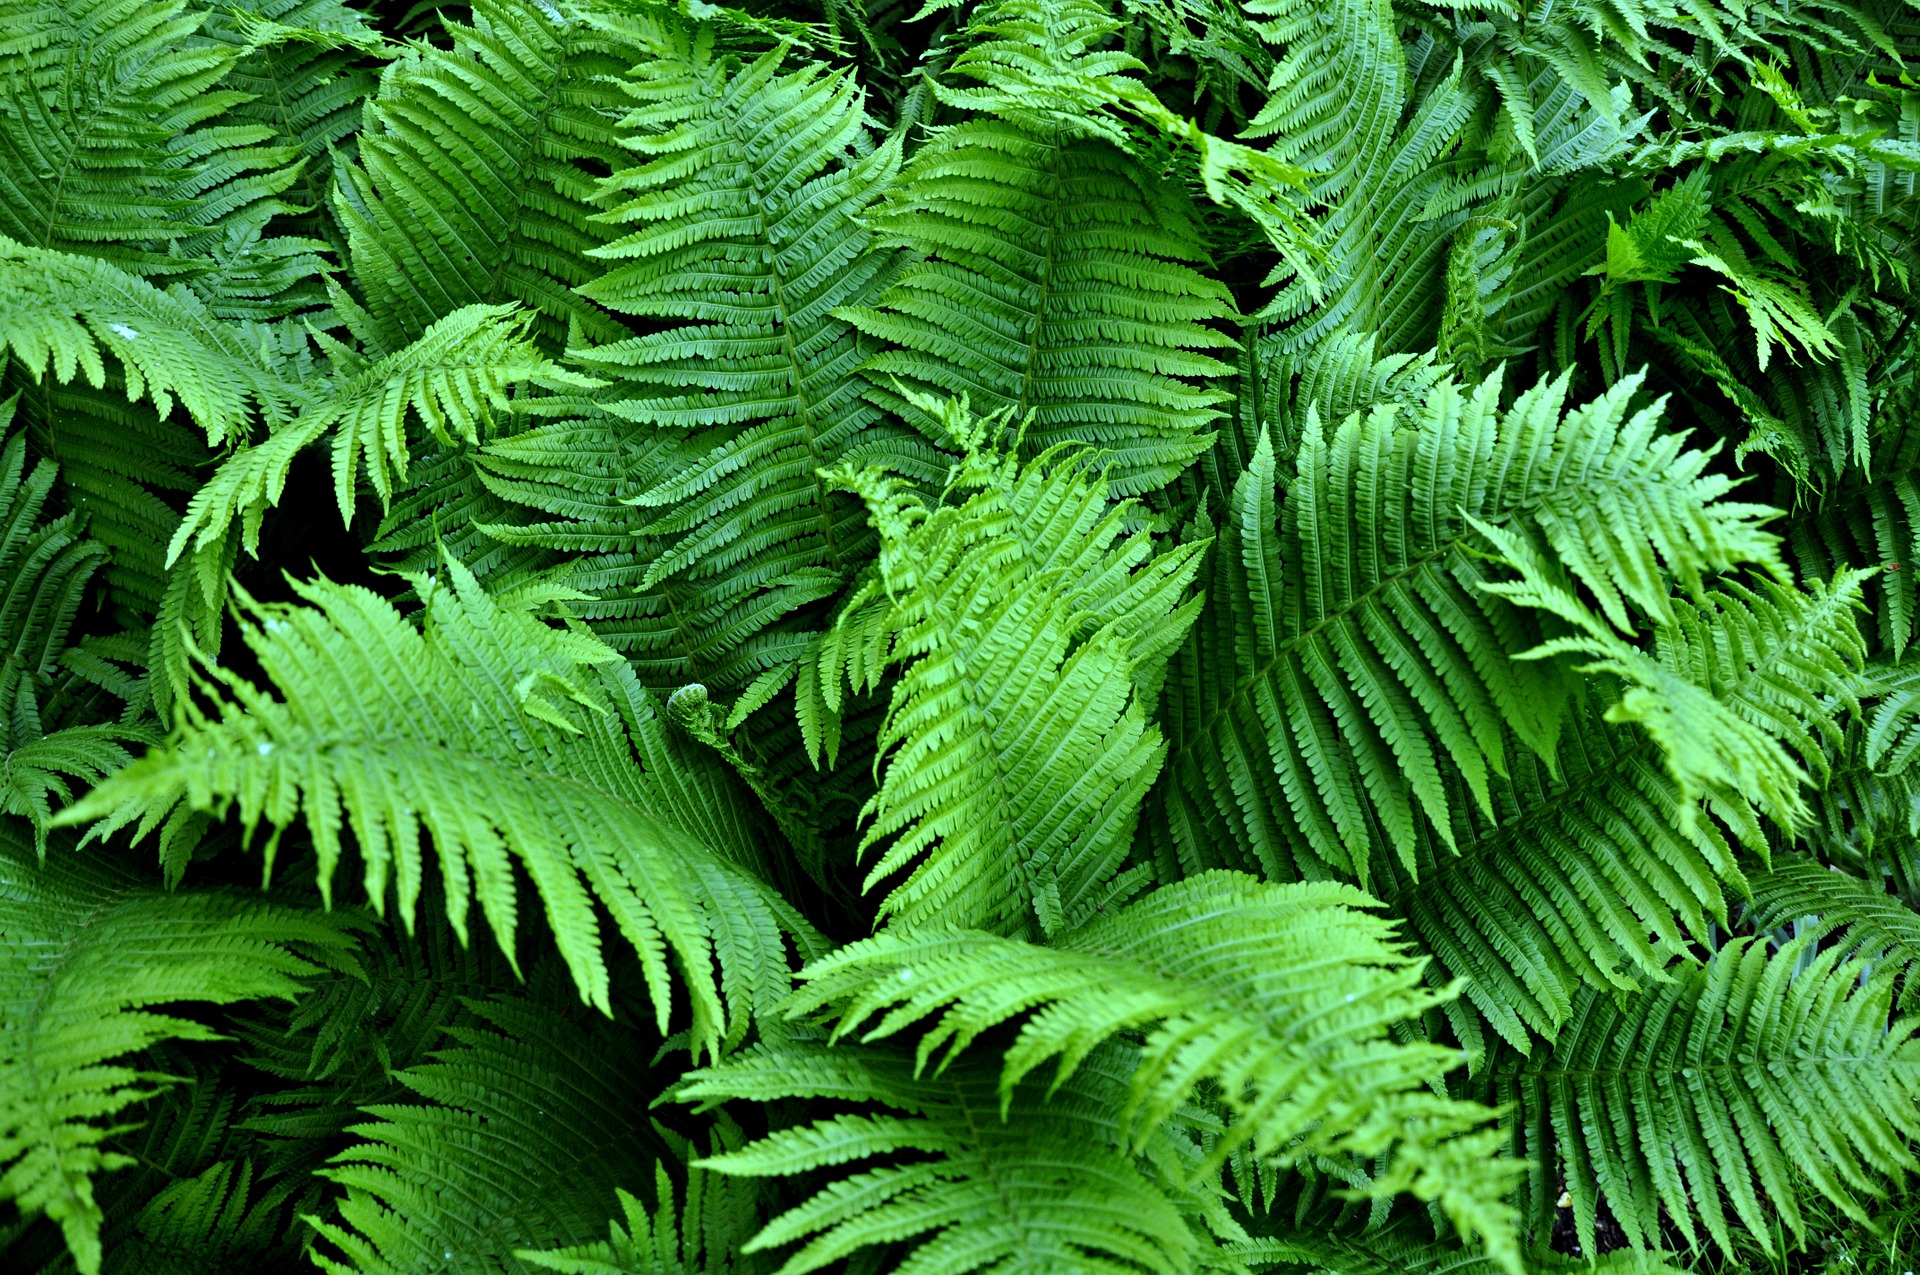 Landscaping with ferns takes a little extra consideration, but the results are spectacular!